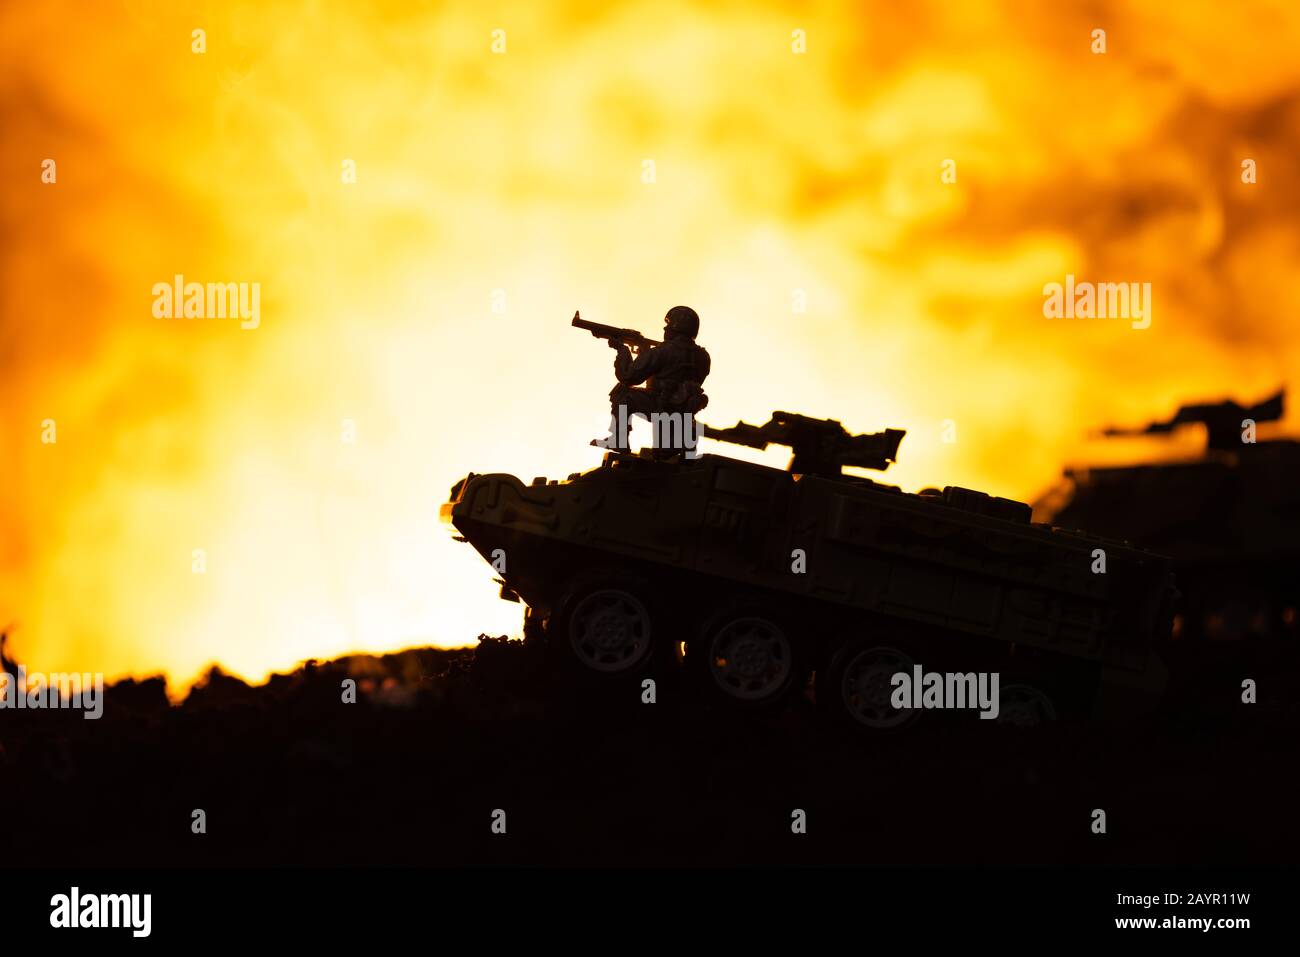 Silhouette of toy soldier on tank with fire at background, battle scene Stock Photo